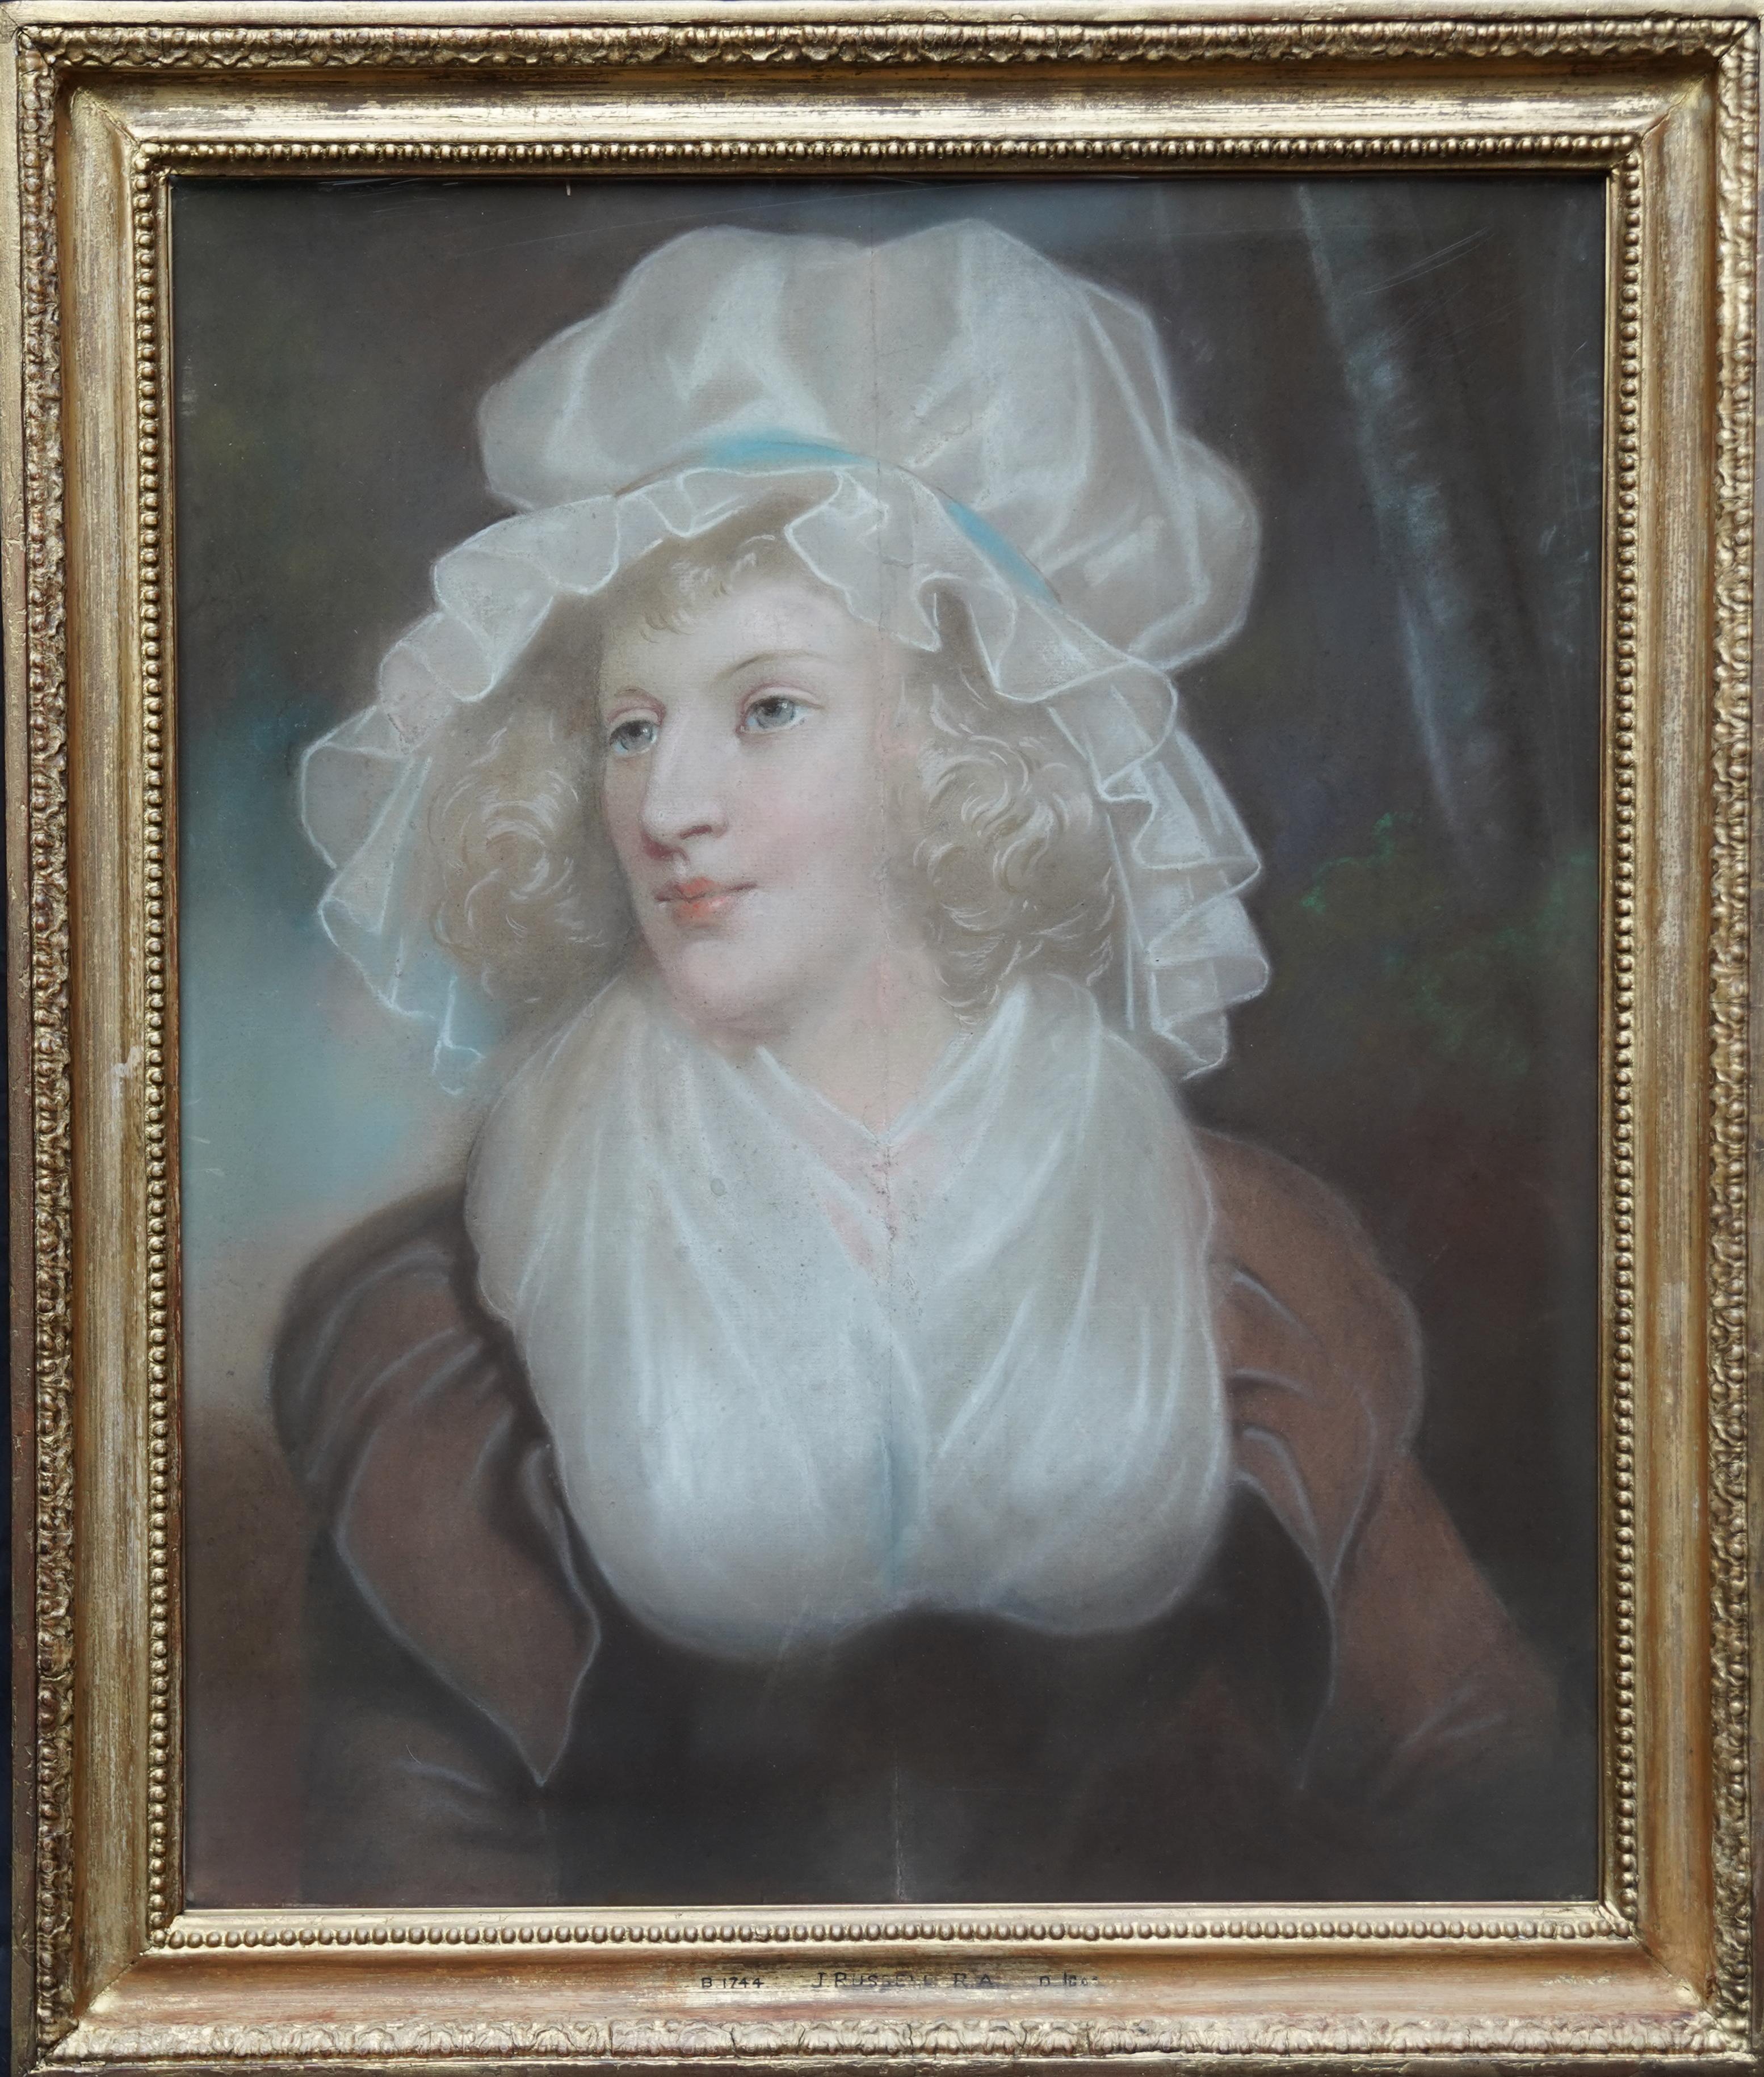 John Russell (att) Portrait Painting - Portrait of Lady in Mob Cap - British Old Master 18th century art oil painting